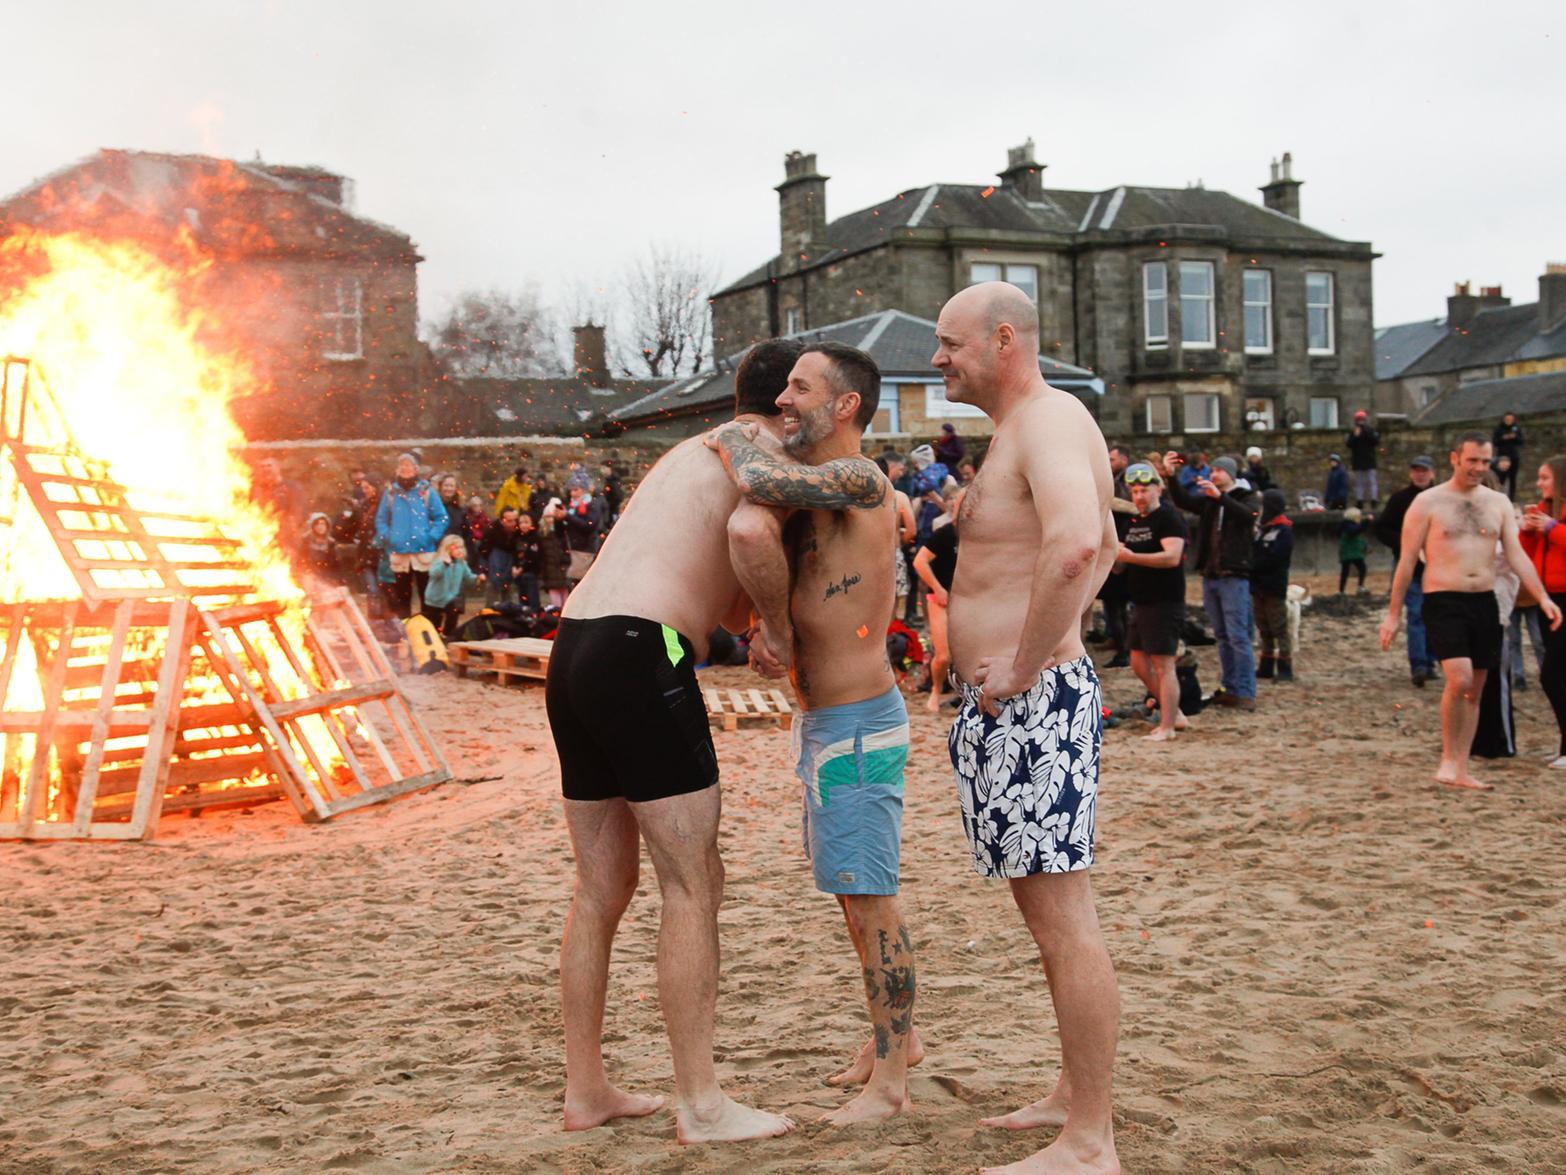 The dookers were clearly enjoying themselves in Portobello, with a big fire at the beach providing some warmth. Pic: Scott Louden